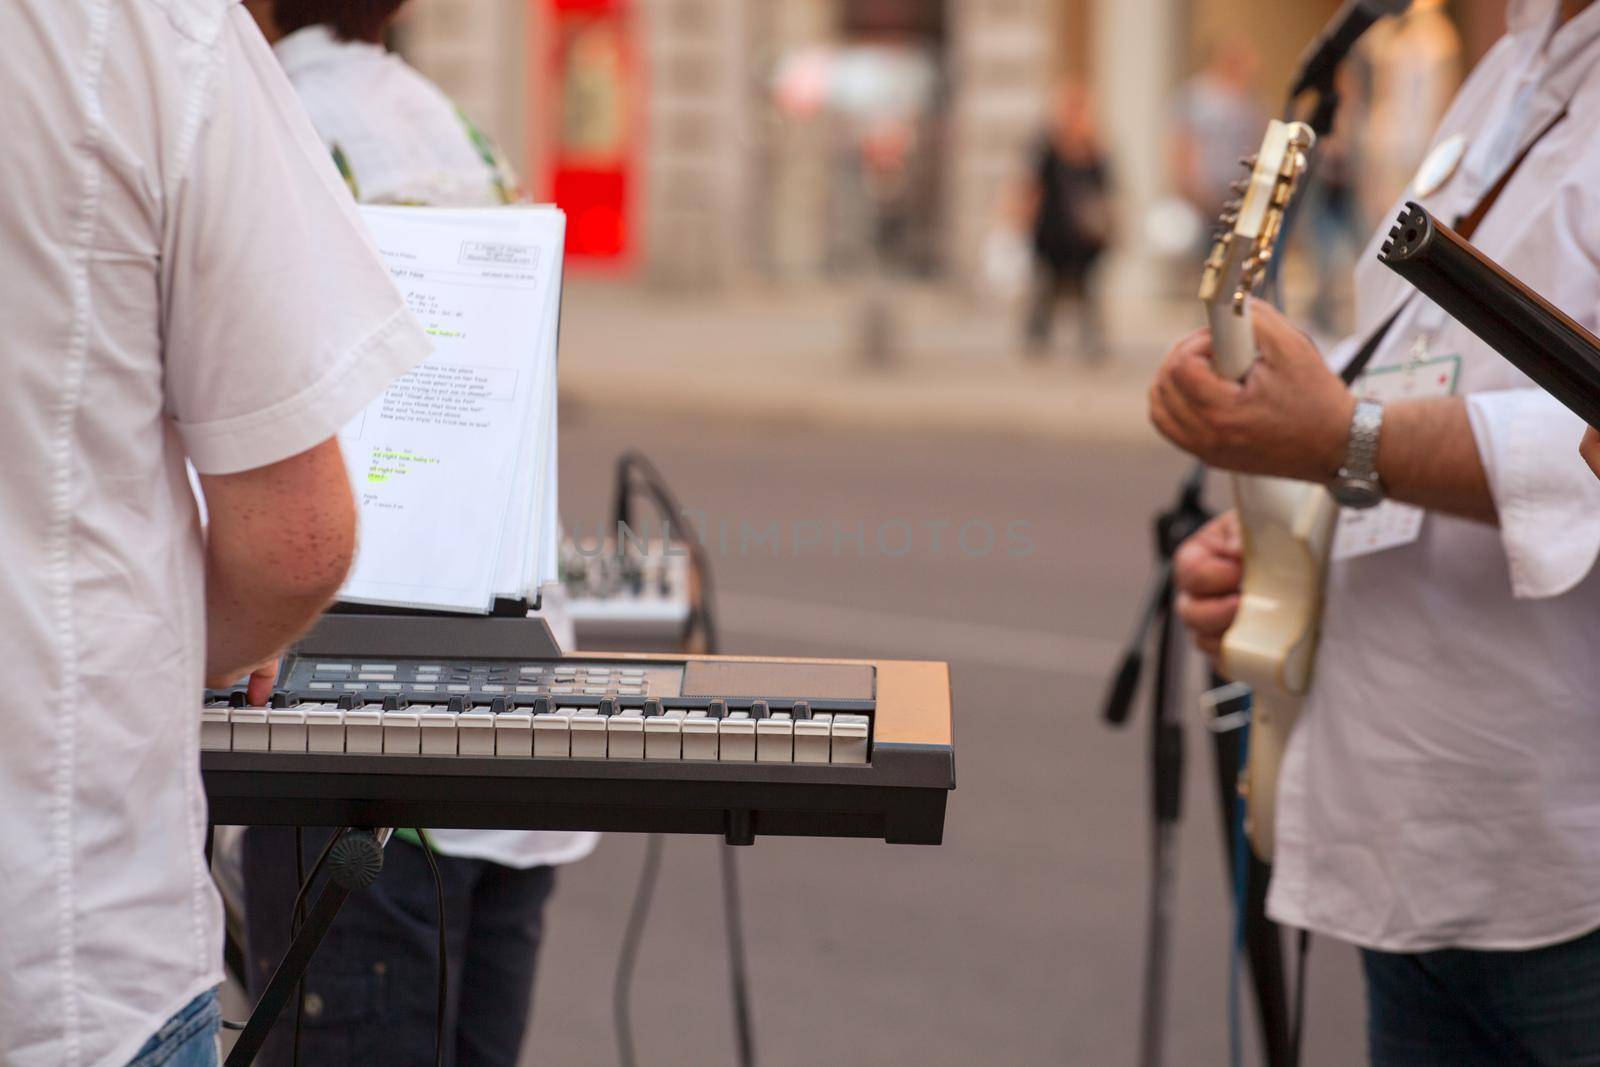 Keyboardist and guitar player during the street concert